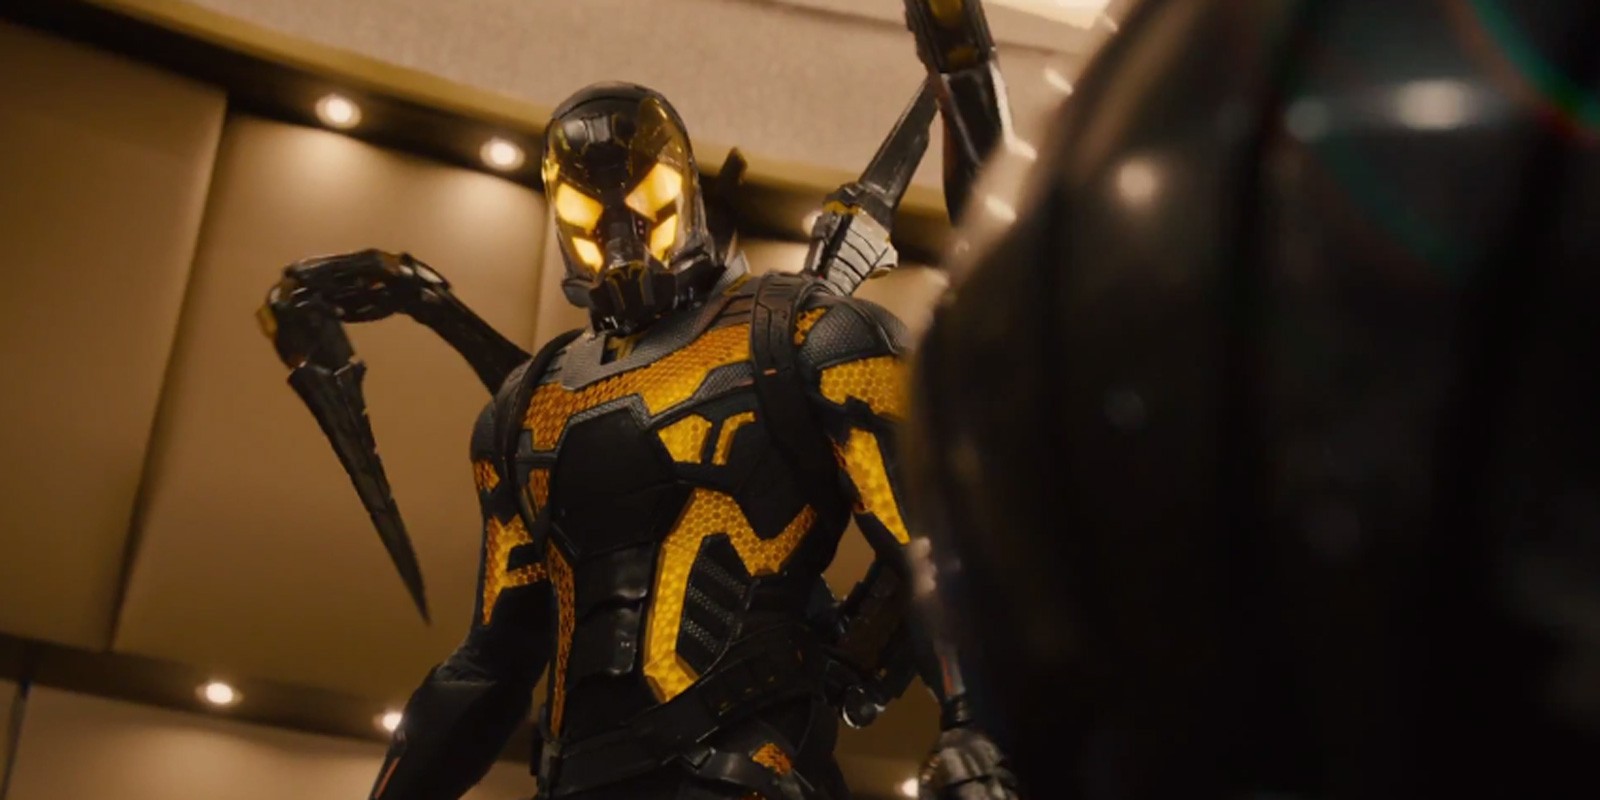 Yellowjacket from Walt Disney Pictures' Ant-Man (2015)